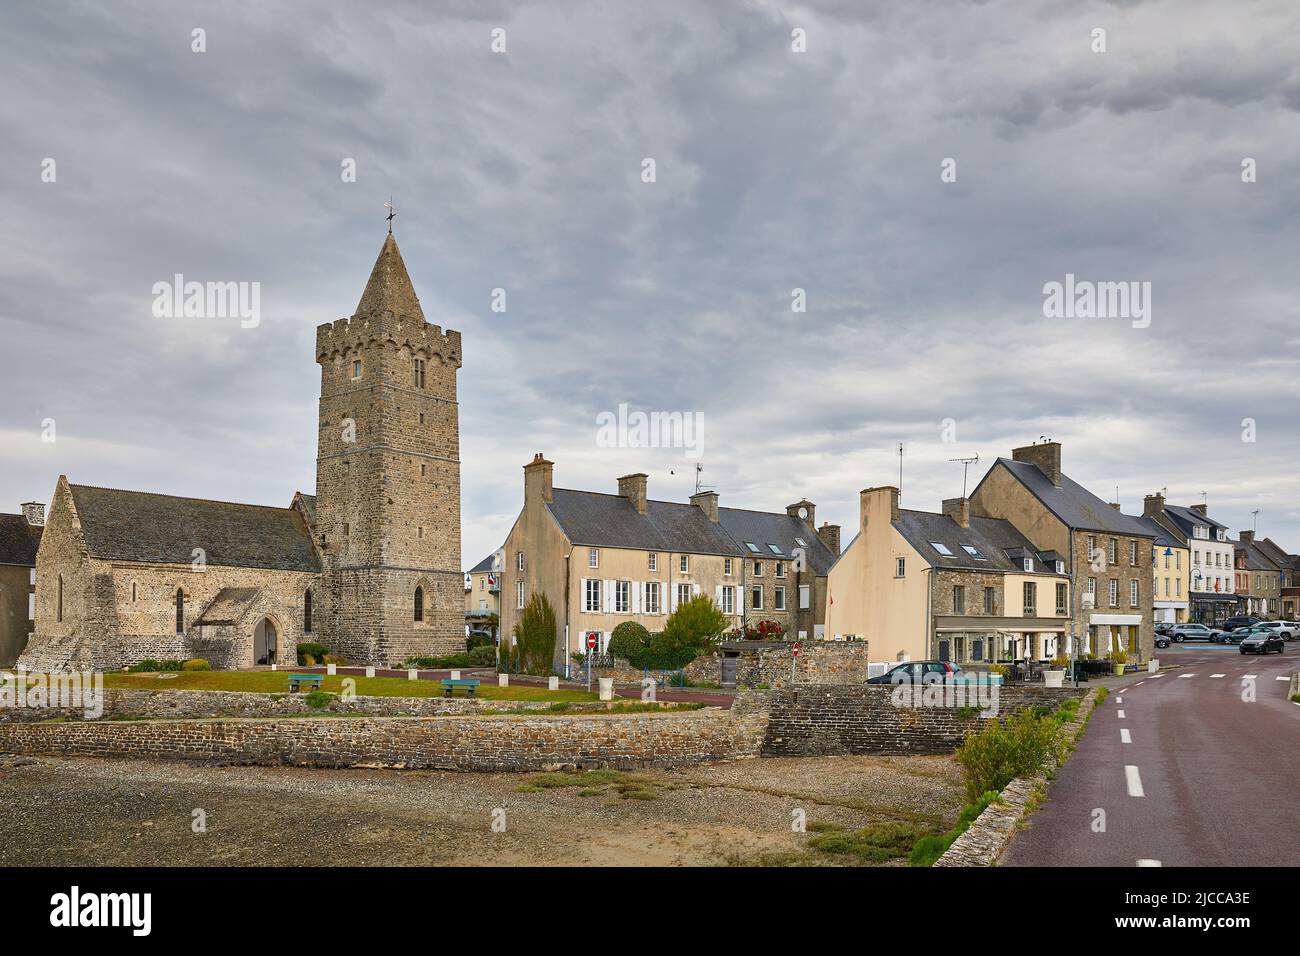 Image of part of the village of Port Bail, Normandy France with the lower church and part of the bridge. Stock Photo